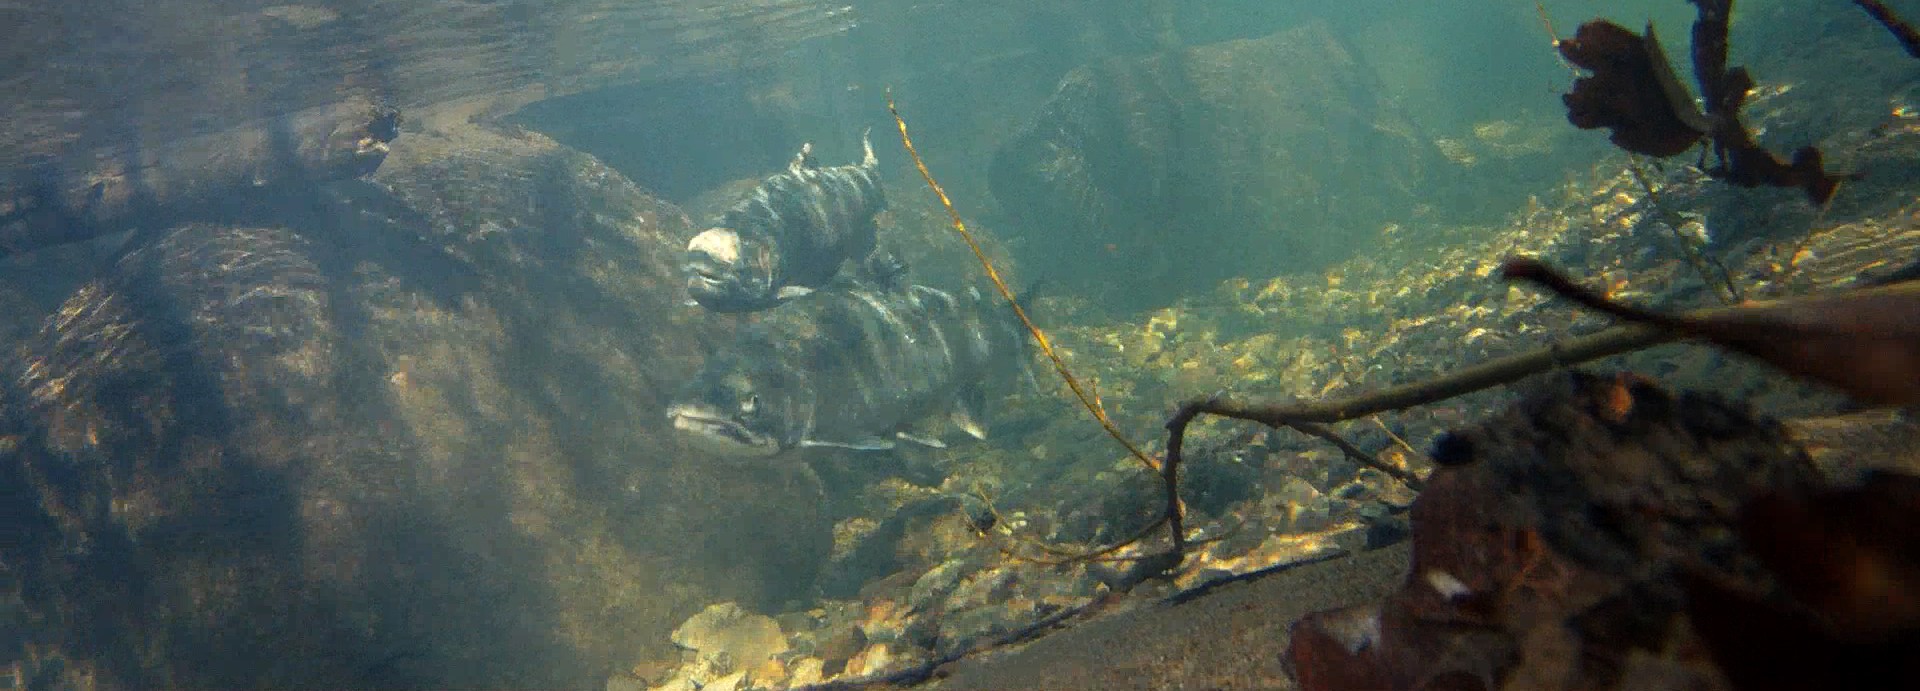 A pair of coho salmon migrate upriver. Collaborative efforts have restored adult returns of coho salmon in the Russian River from fewer than 10 to a few hundred.